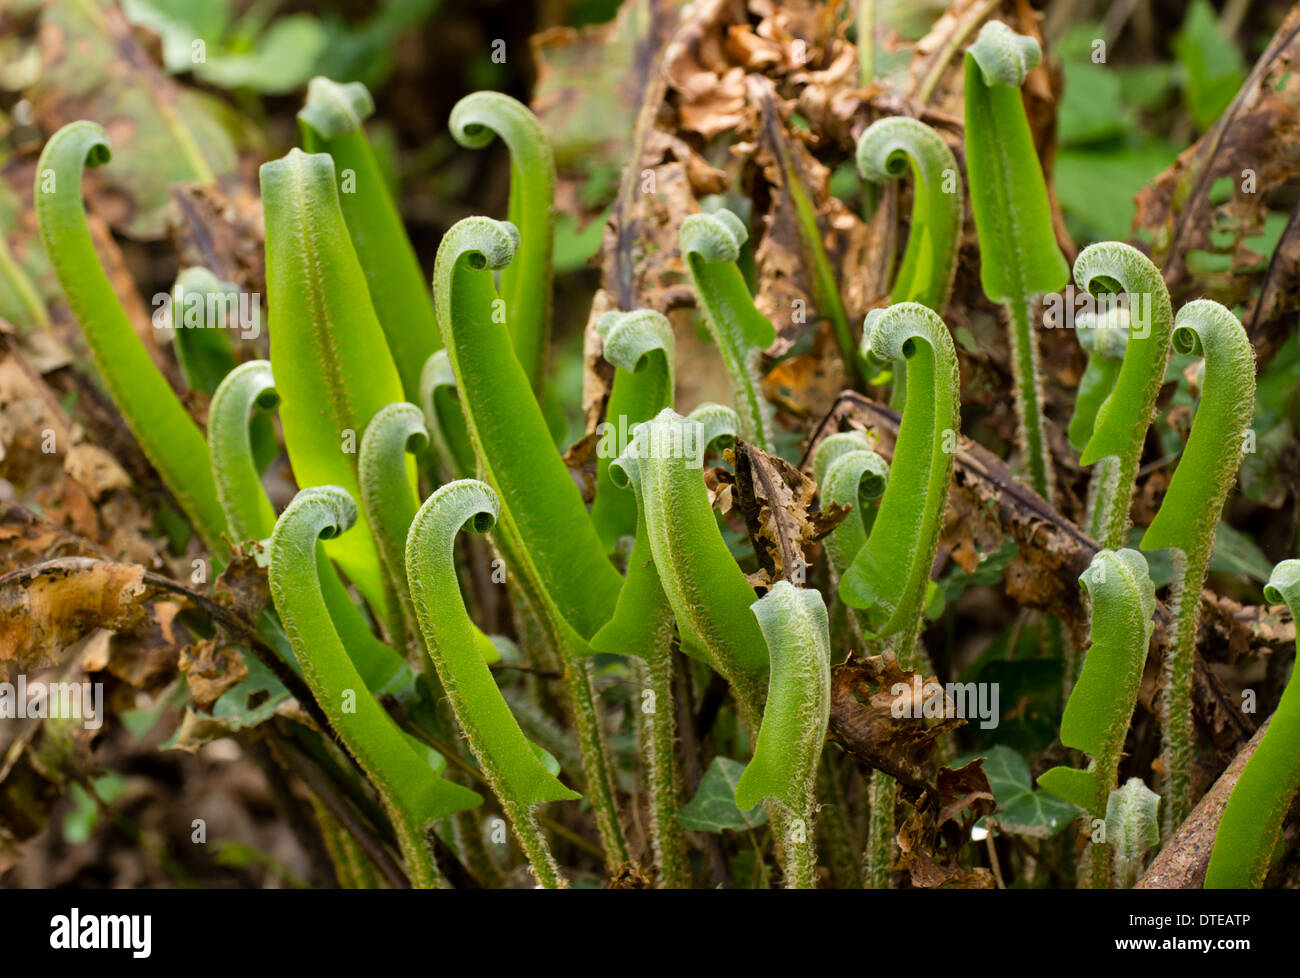 Young fronds of Asplenium scolopendrium unfurling in Cann Wood, Plymouth Stock Photo